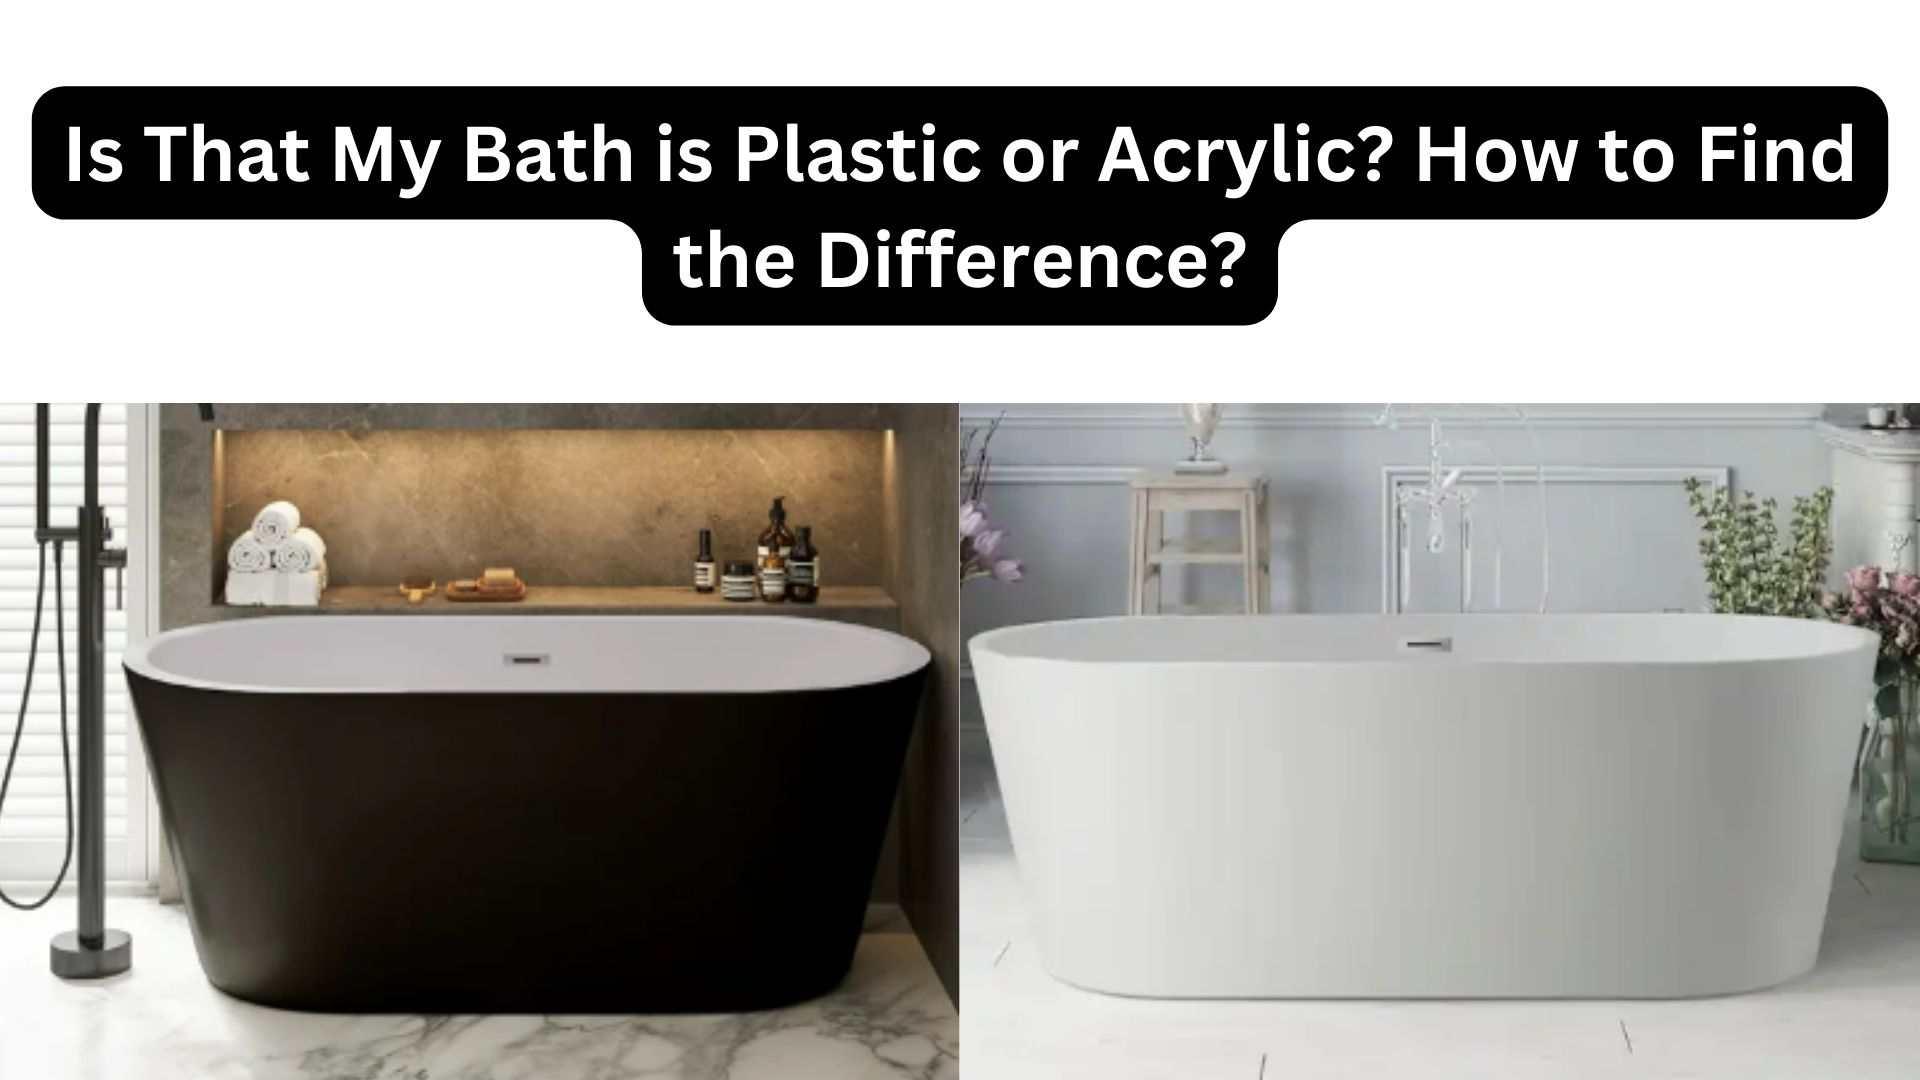 Is My Bathtub Plastic or Acrylic? How to Find the Difference?